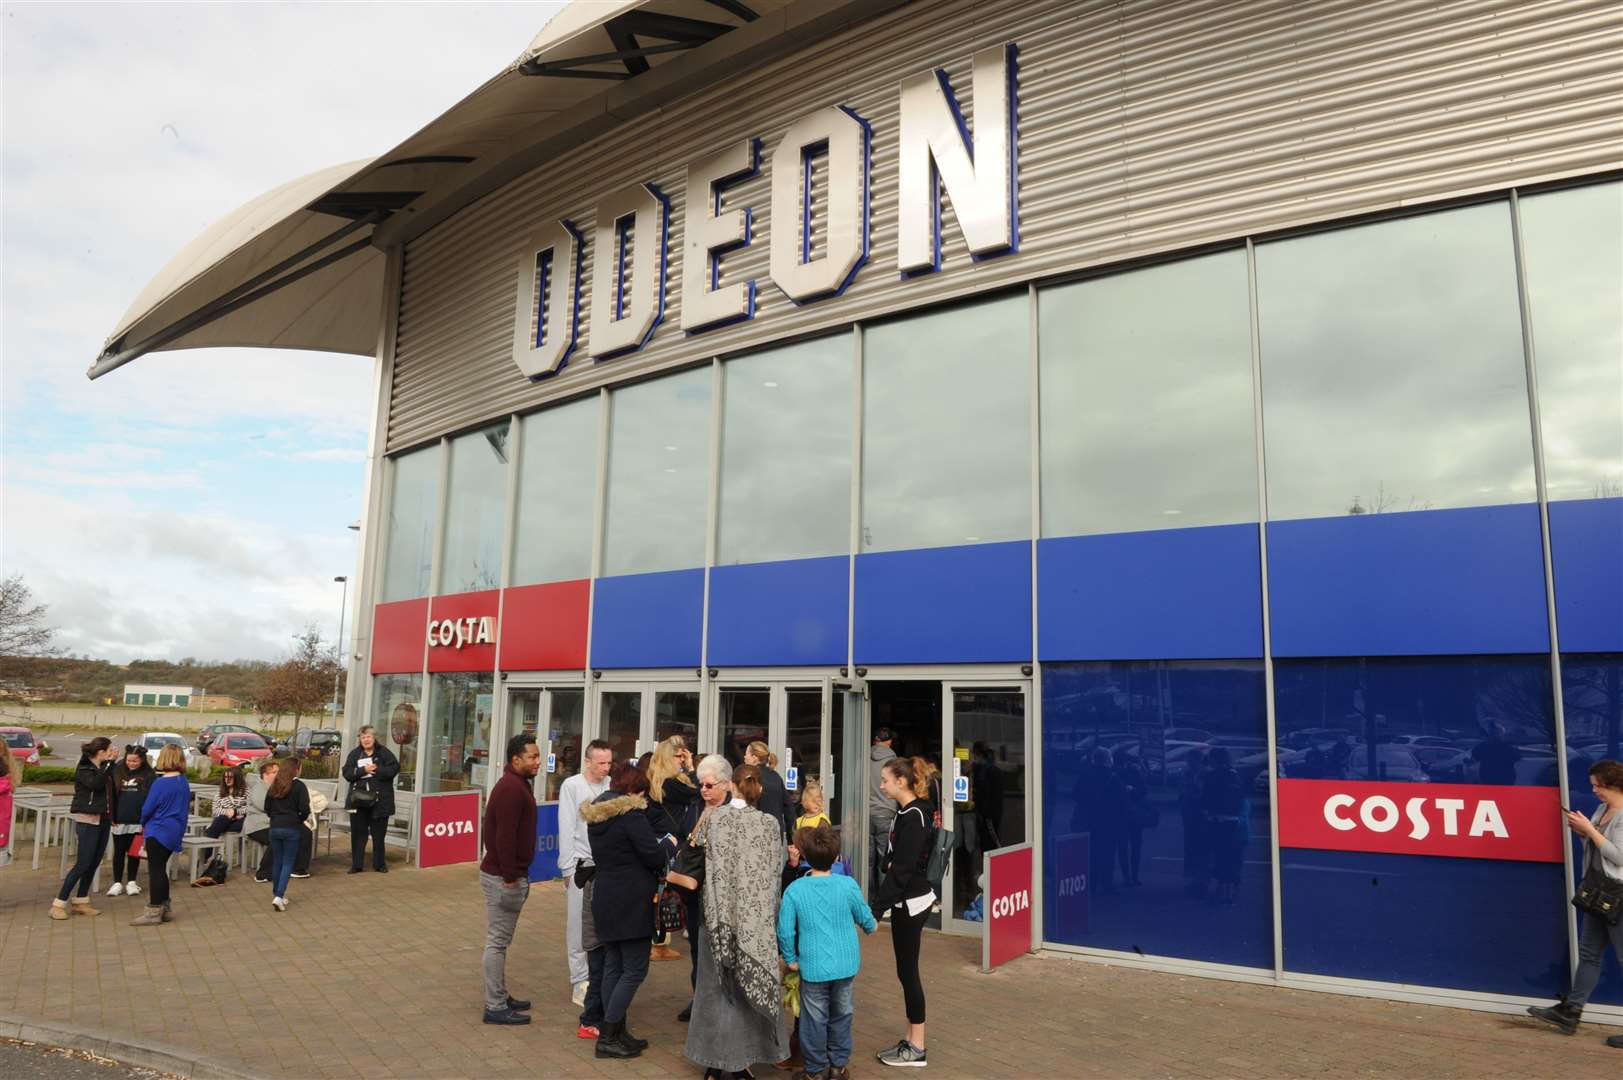 The Odeon cinema at the site